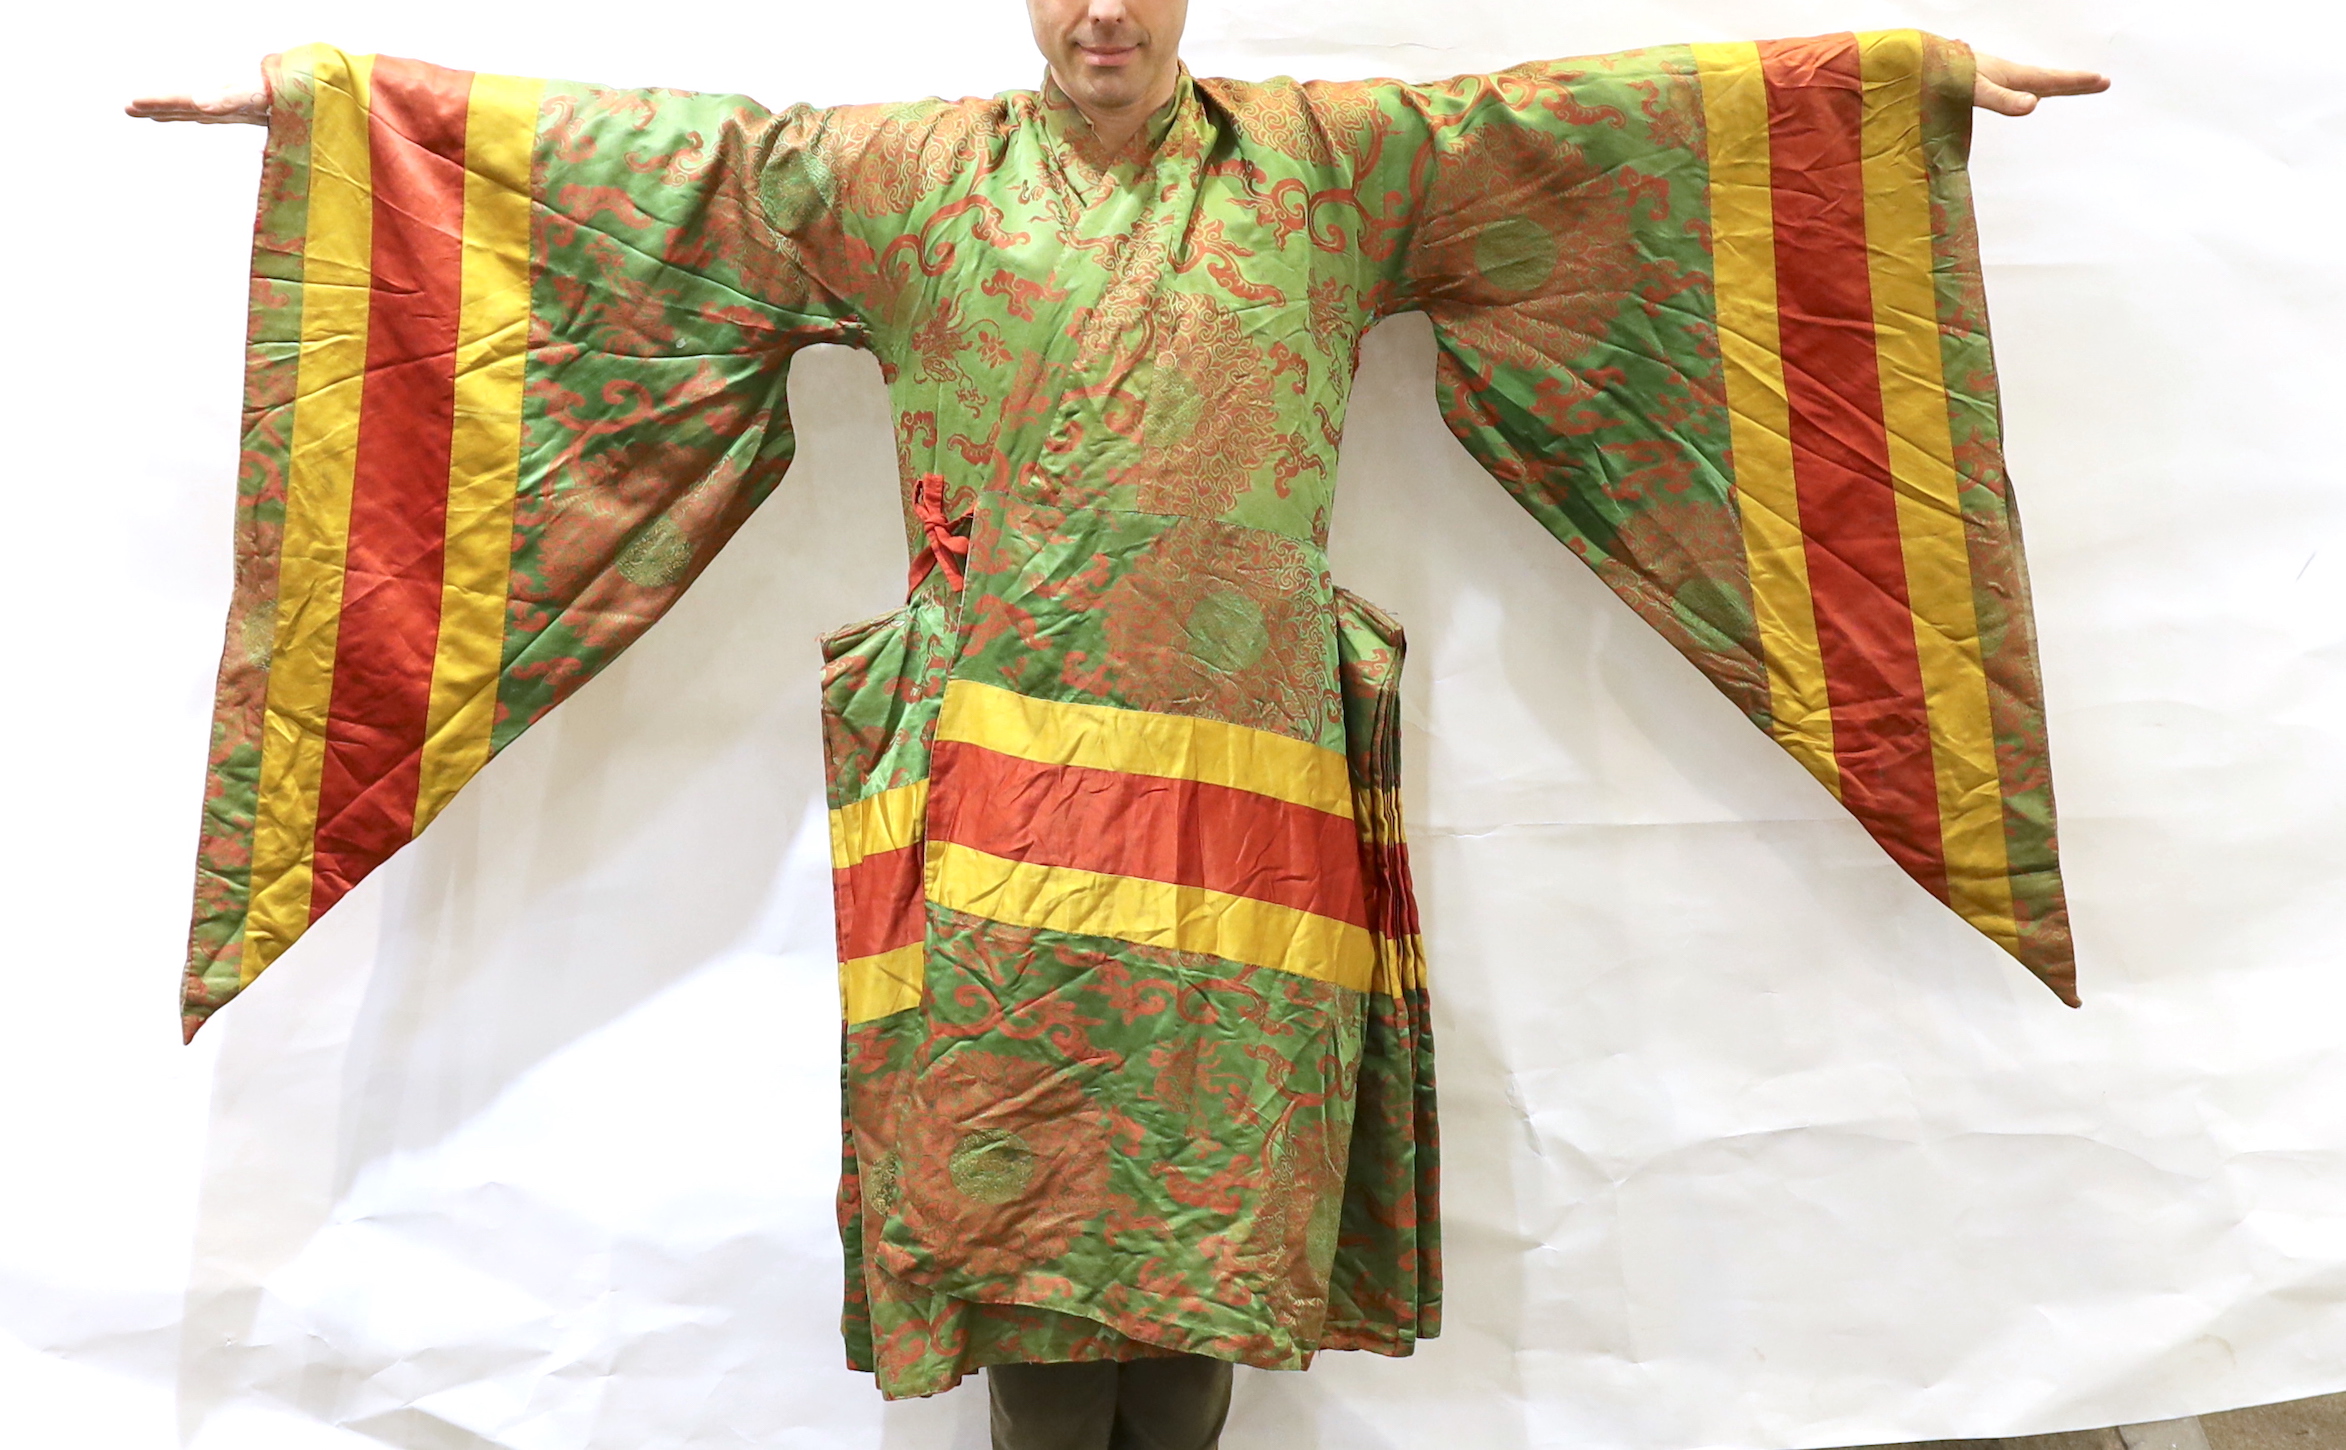 An unusual early 20th century Japanese silk damask kimono, designed with pointed sleeves and wide pleating on the hips, and horizontal yellow and red stripes, possibly a costume for a Kabuki theatre character